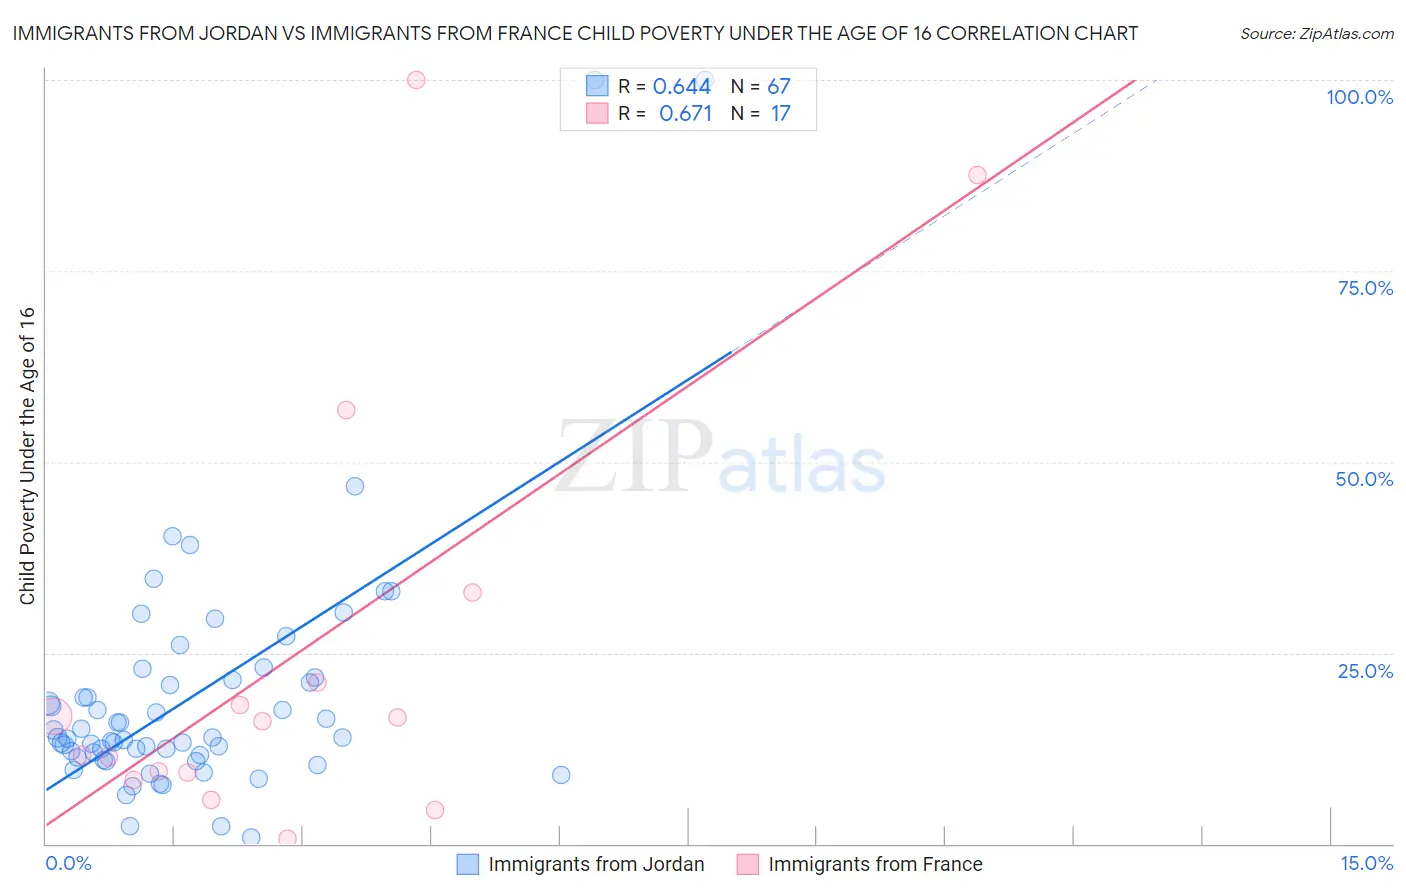 Immigrants from Jordan vs Immigrants from France Child Poverty Under the Age of 16